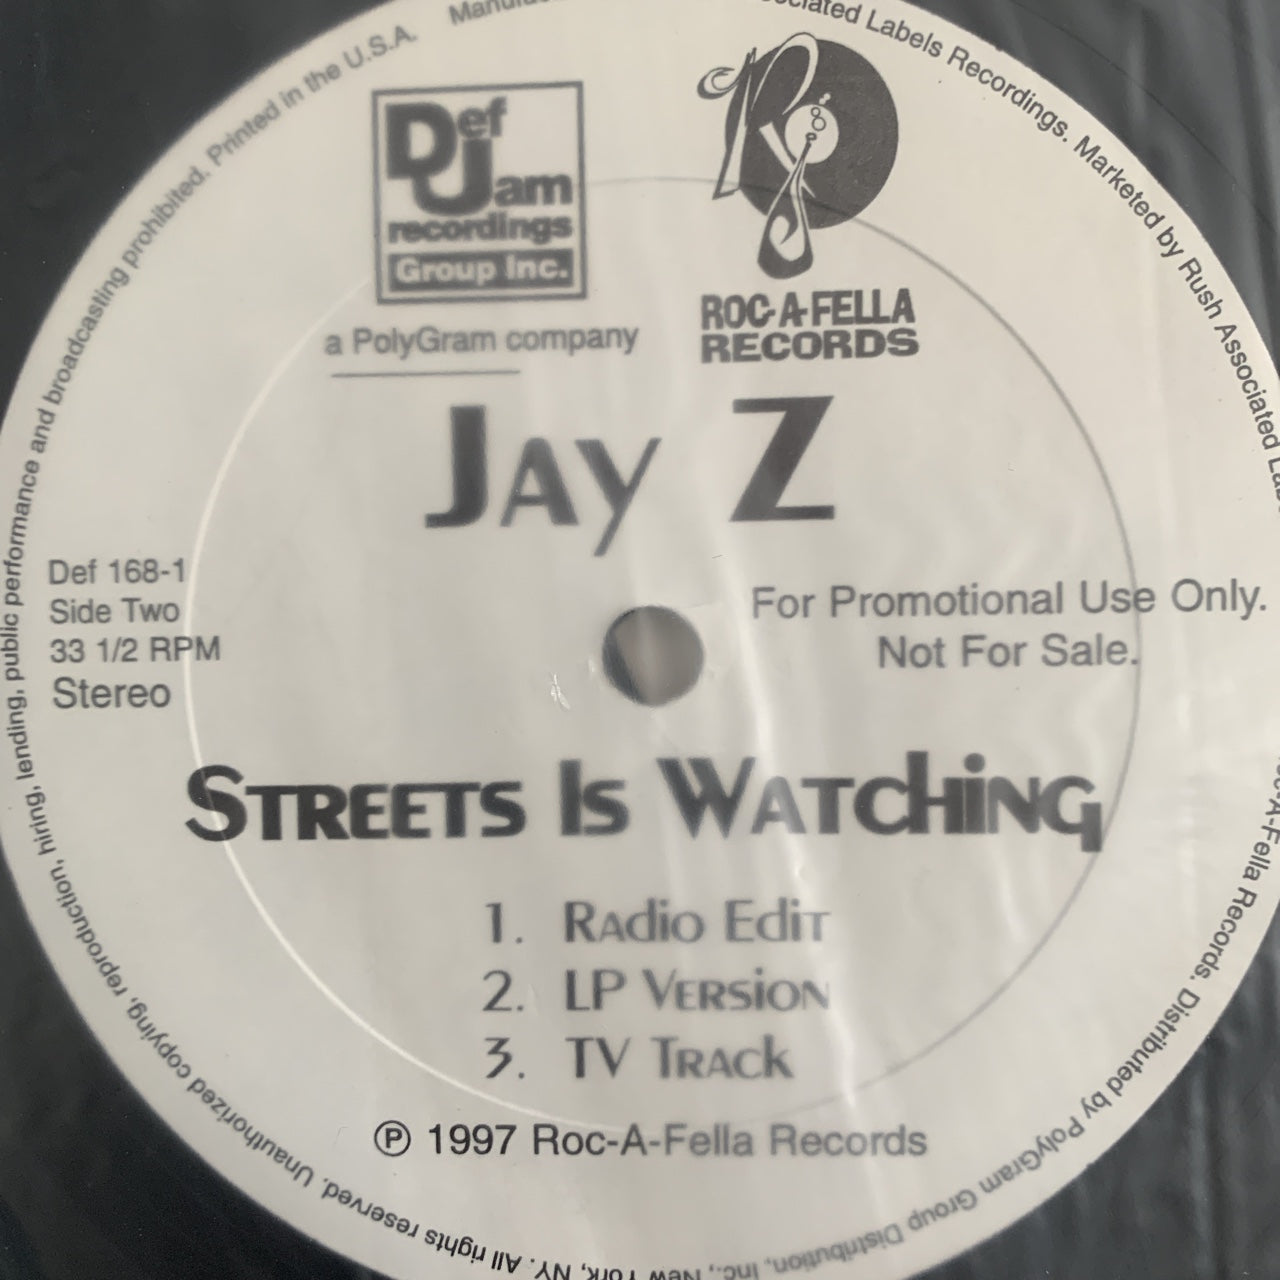 Jay Z “Sunshine” / “Streets Is Watching”